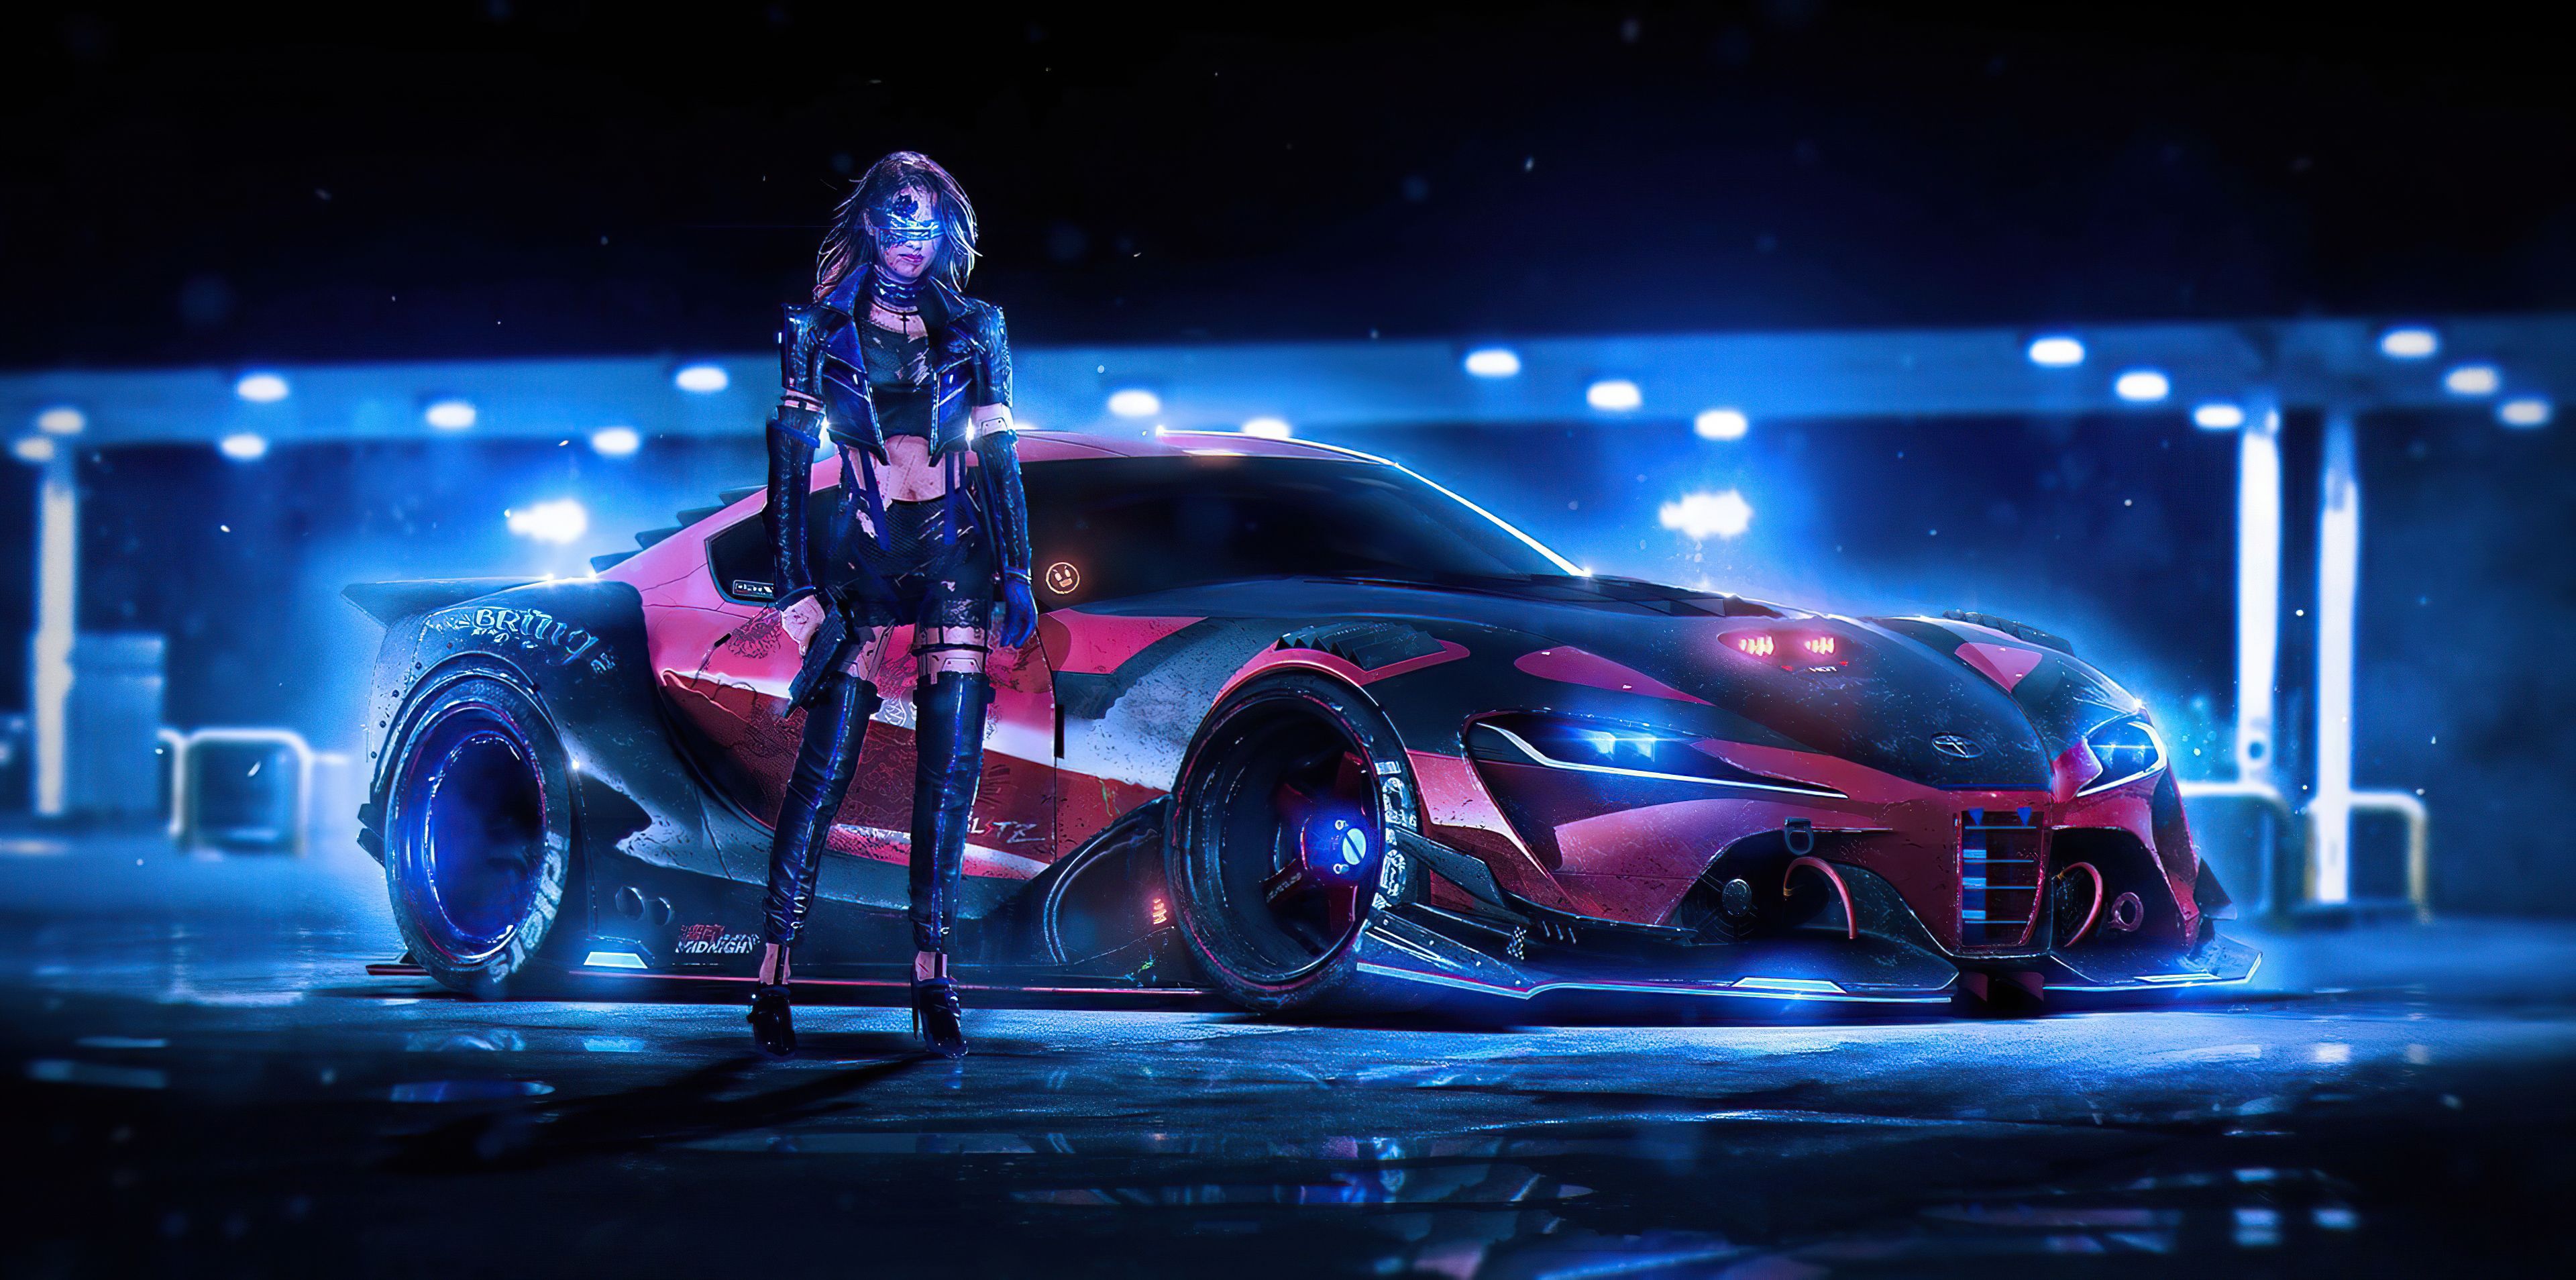 Wallpaper 4k Cyber Girl With Red Car 4k Cyber Girl With Red Car 4k wallpaper